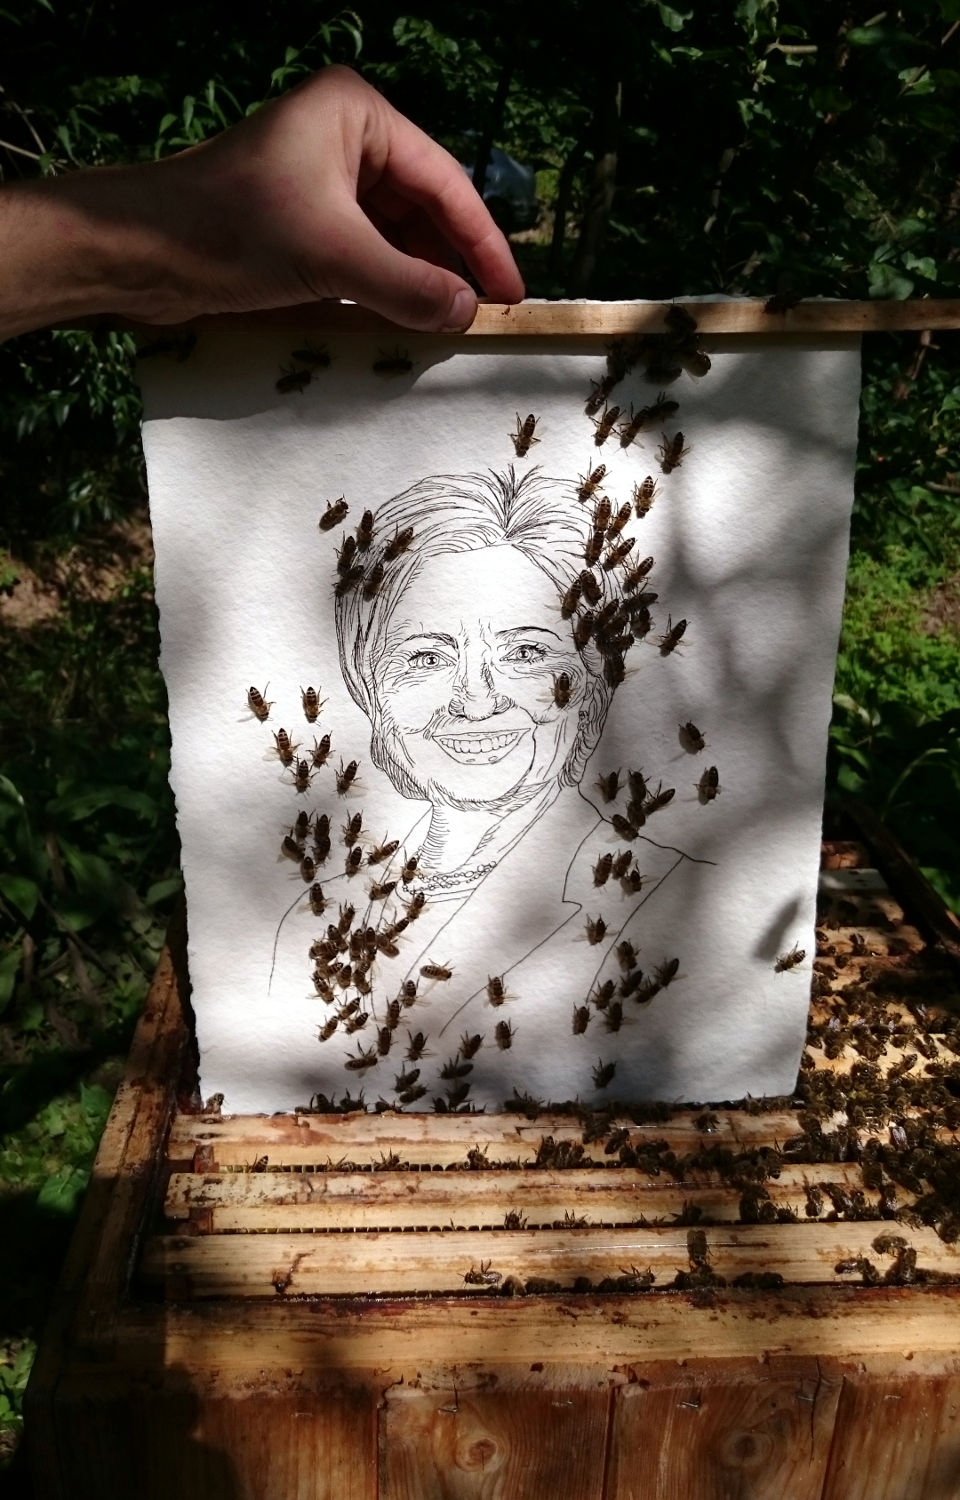 Hillary Clinton beeing inserted in the beehive